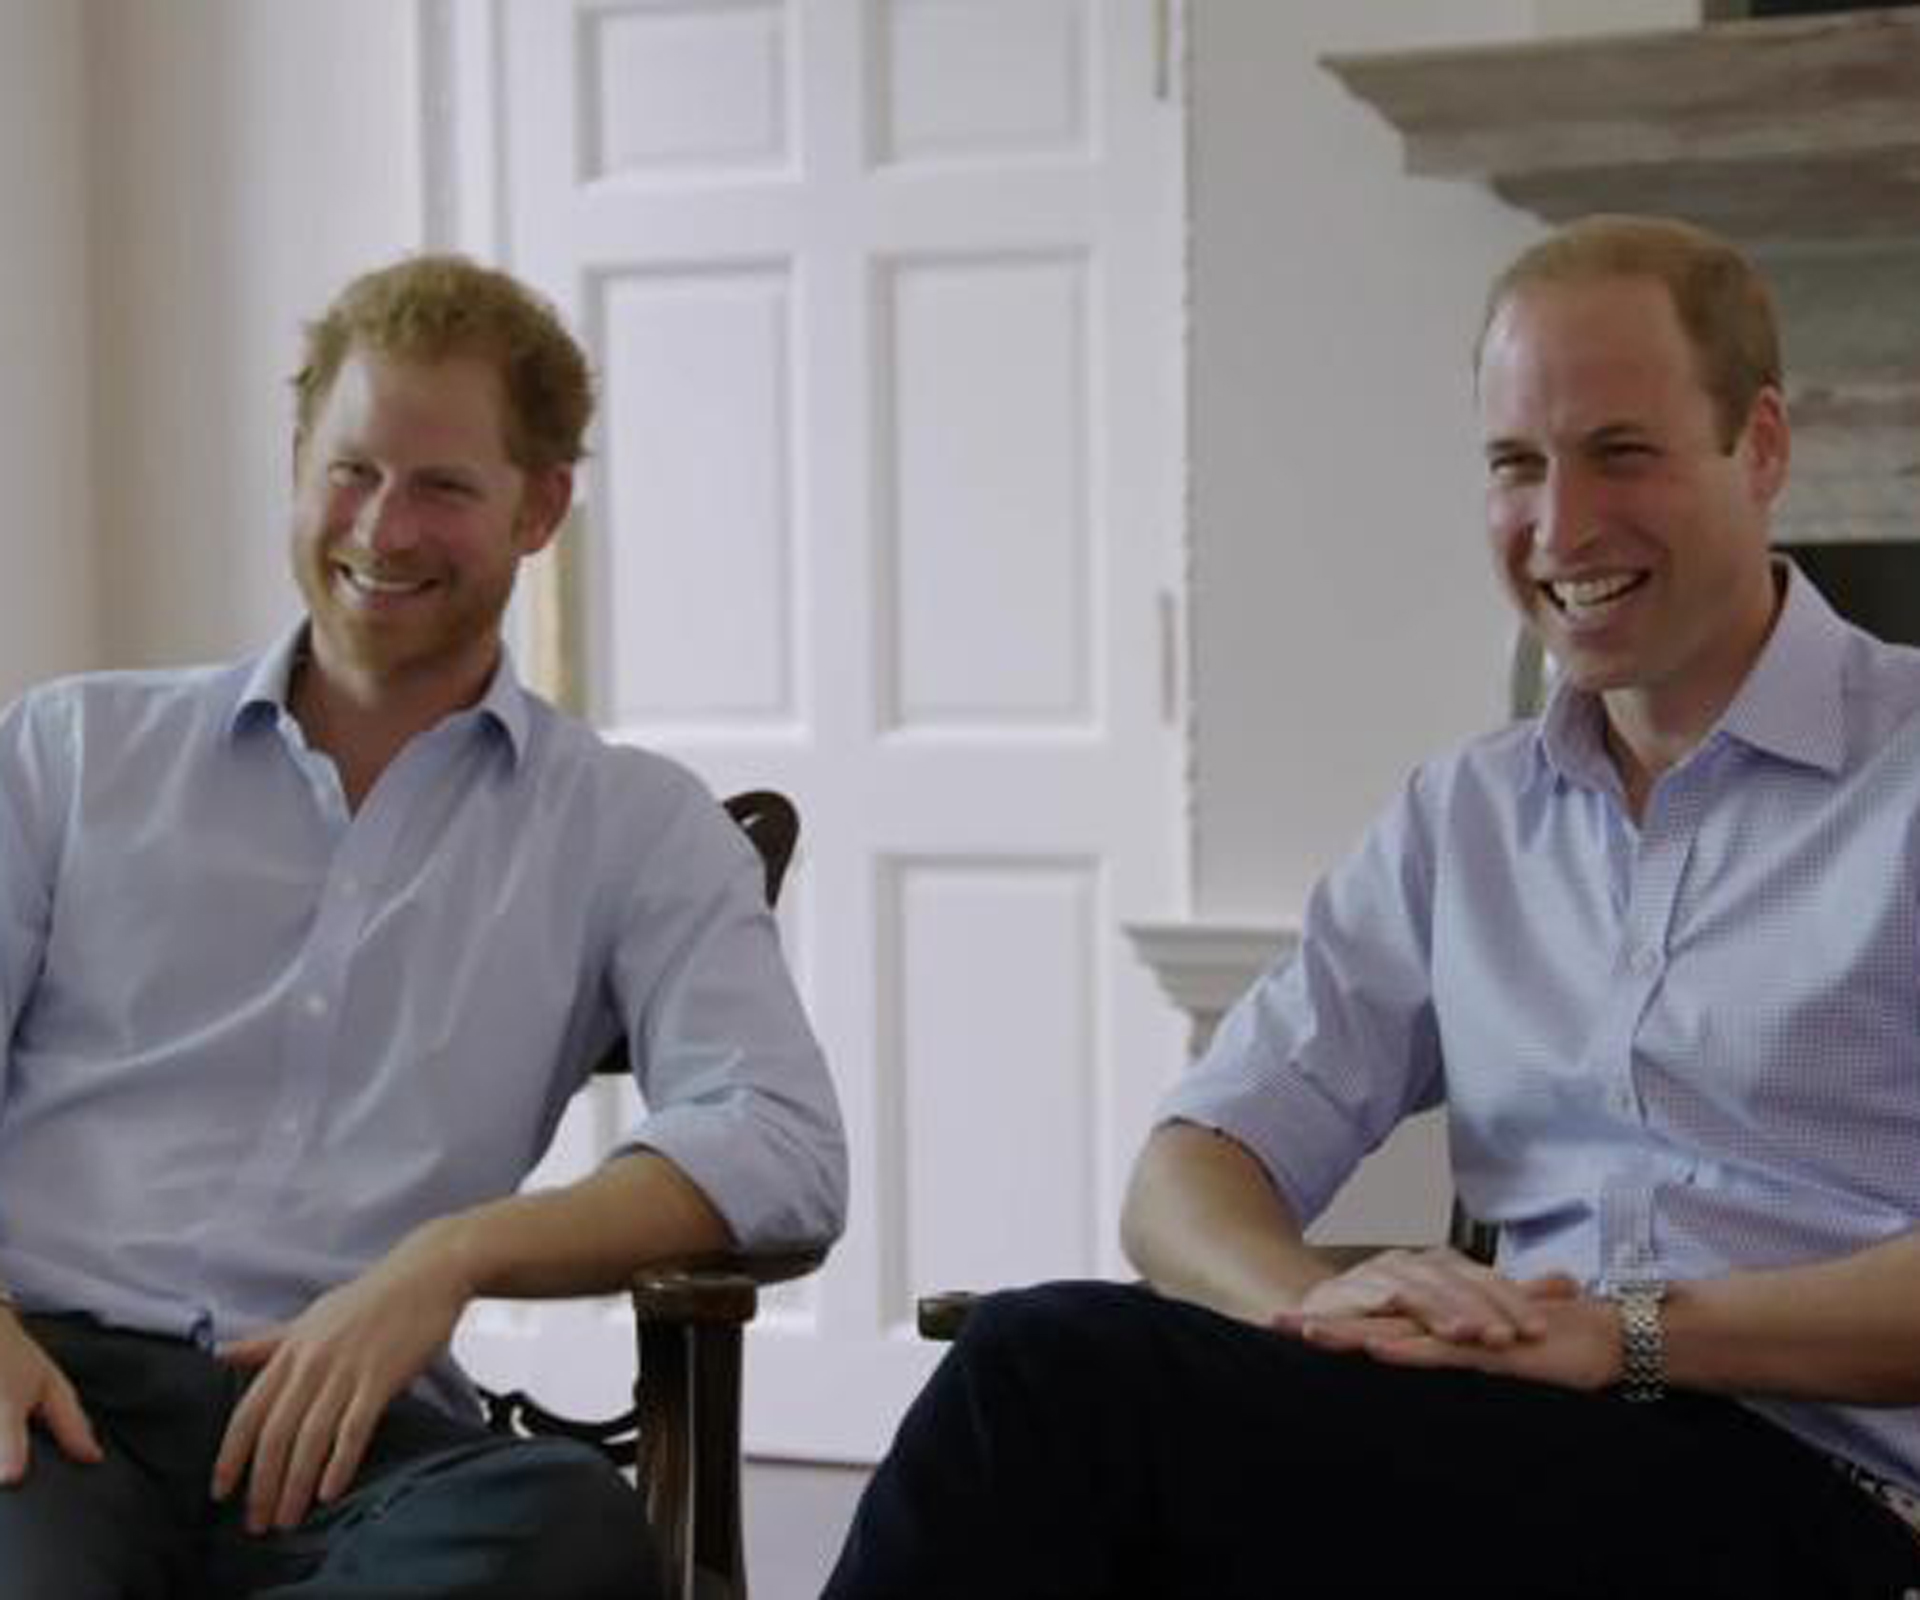 Prince William swears during TV interview